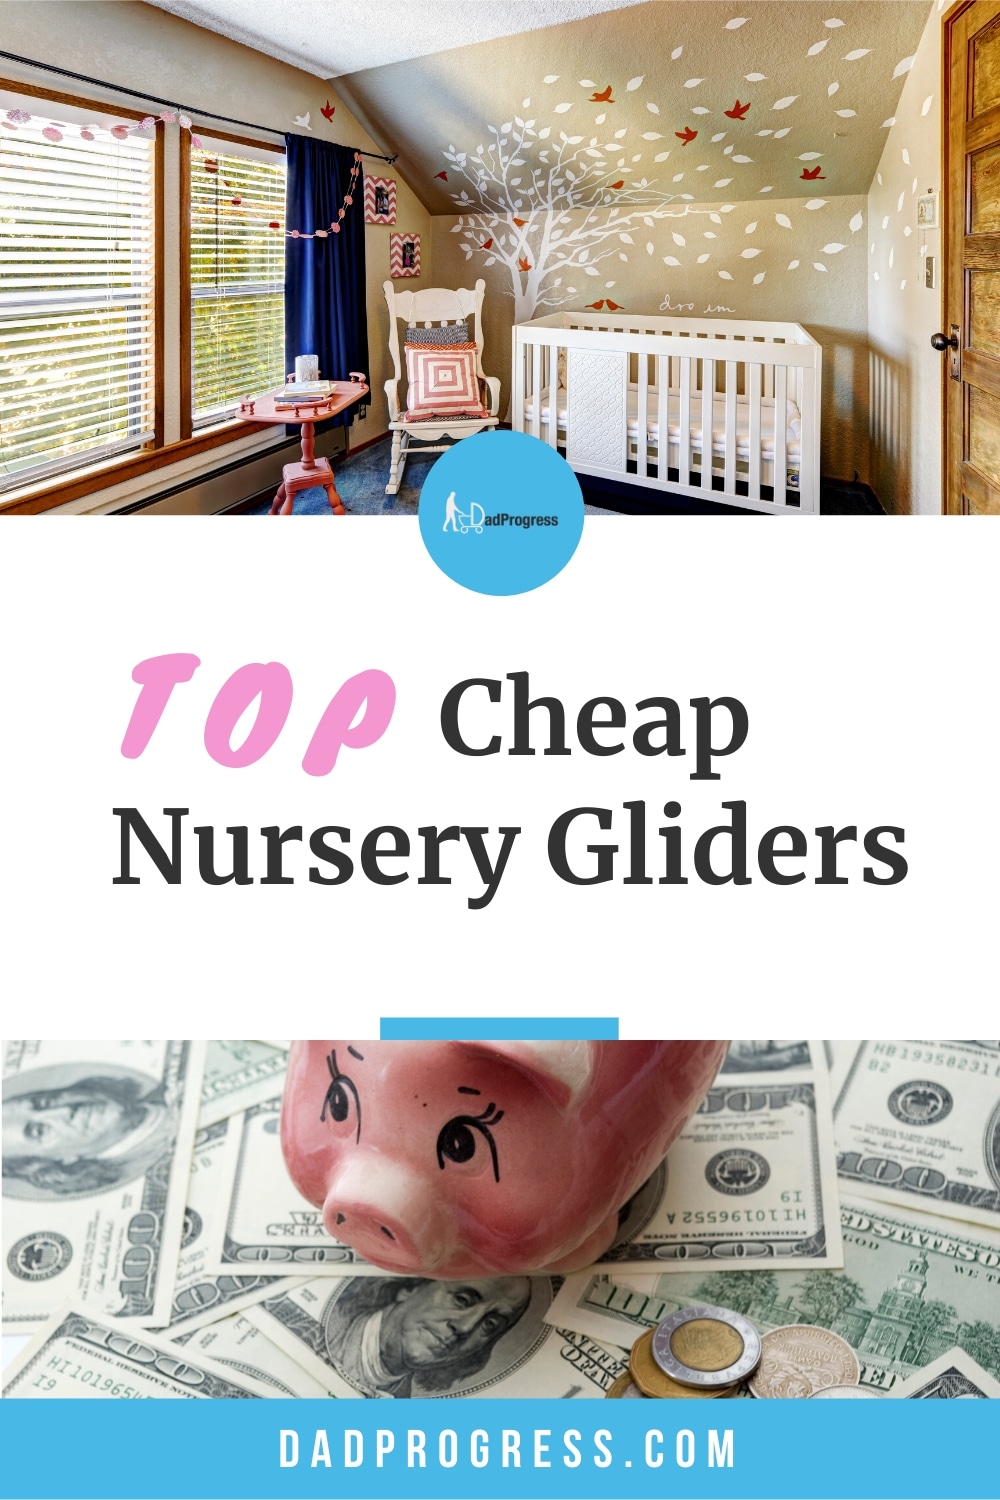 Preparing for a baby costs money and you may not want to pour or your life savings into a nursery. Finding the best afffordable nursery glider rocker may not be easy though. I prepared a list of solid baby chairs (they are all small and most come with an ottoman) to give you some ideas. Click to read more.